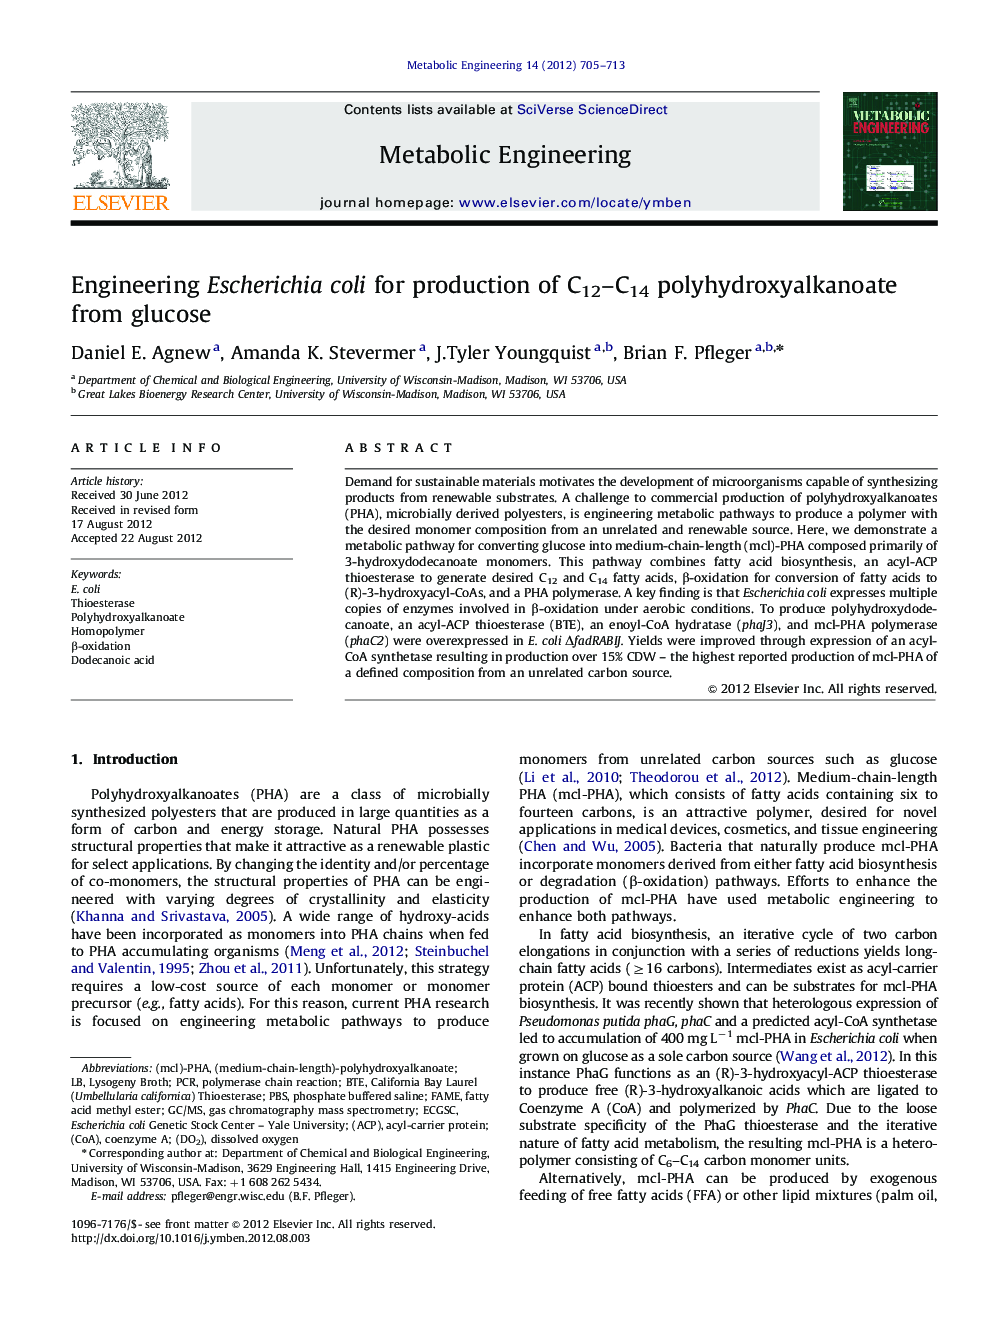 Engineering Escherichia coli for production of C12–C14 polyhydroxyalkanoate from glucose